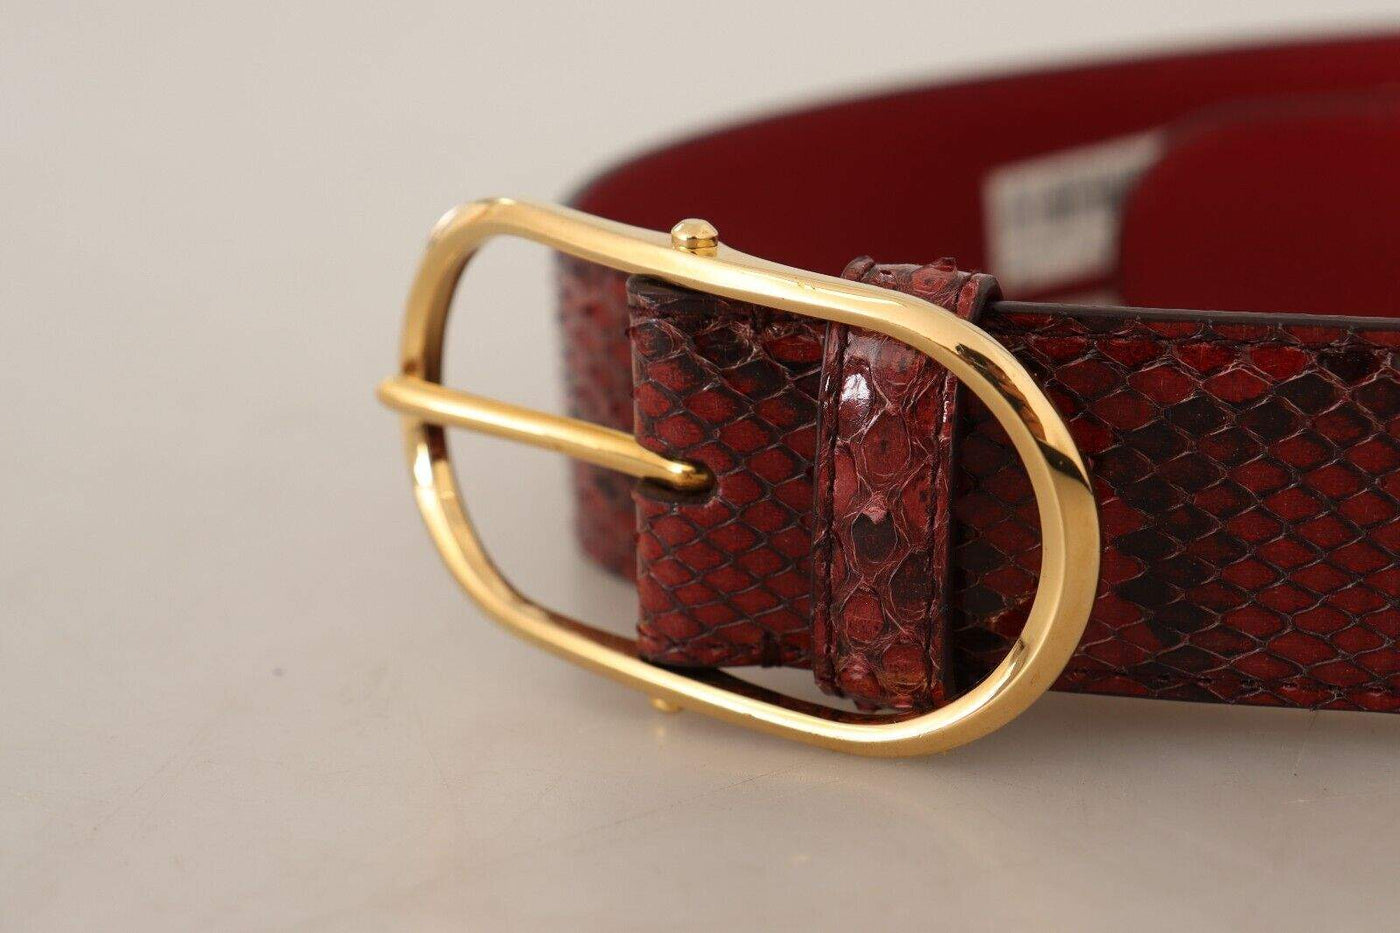 Dolce & Gabbana Red Exotic Leather Gold Oval Buckle Belt 75 cm / 30 Inches, 80 cm / 32 Inches, Belts - Women - Accessories, Dolce & Gabbana, feed-1, Red at SEYMAYKA